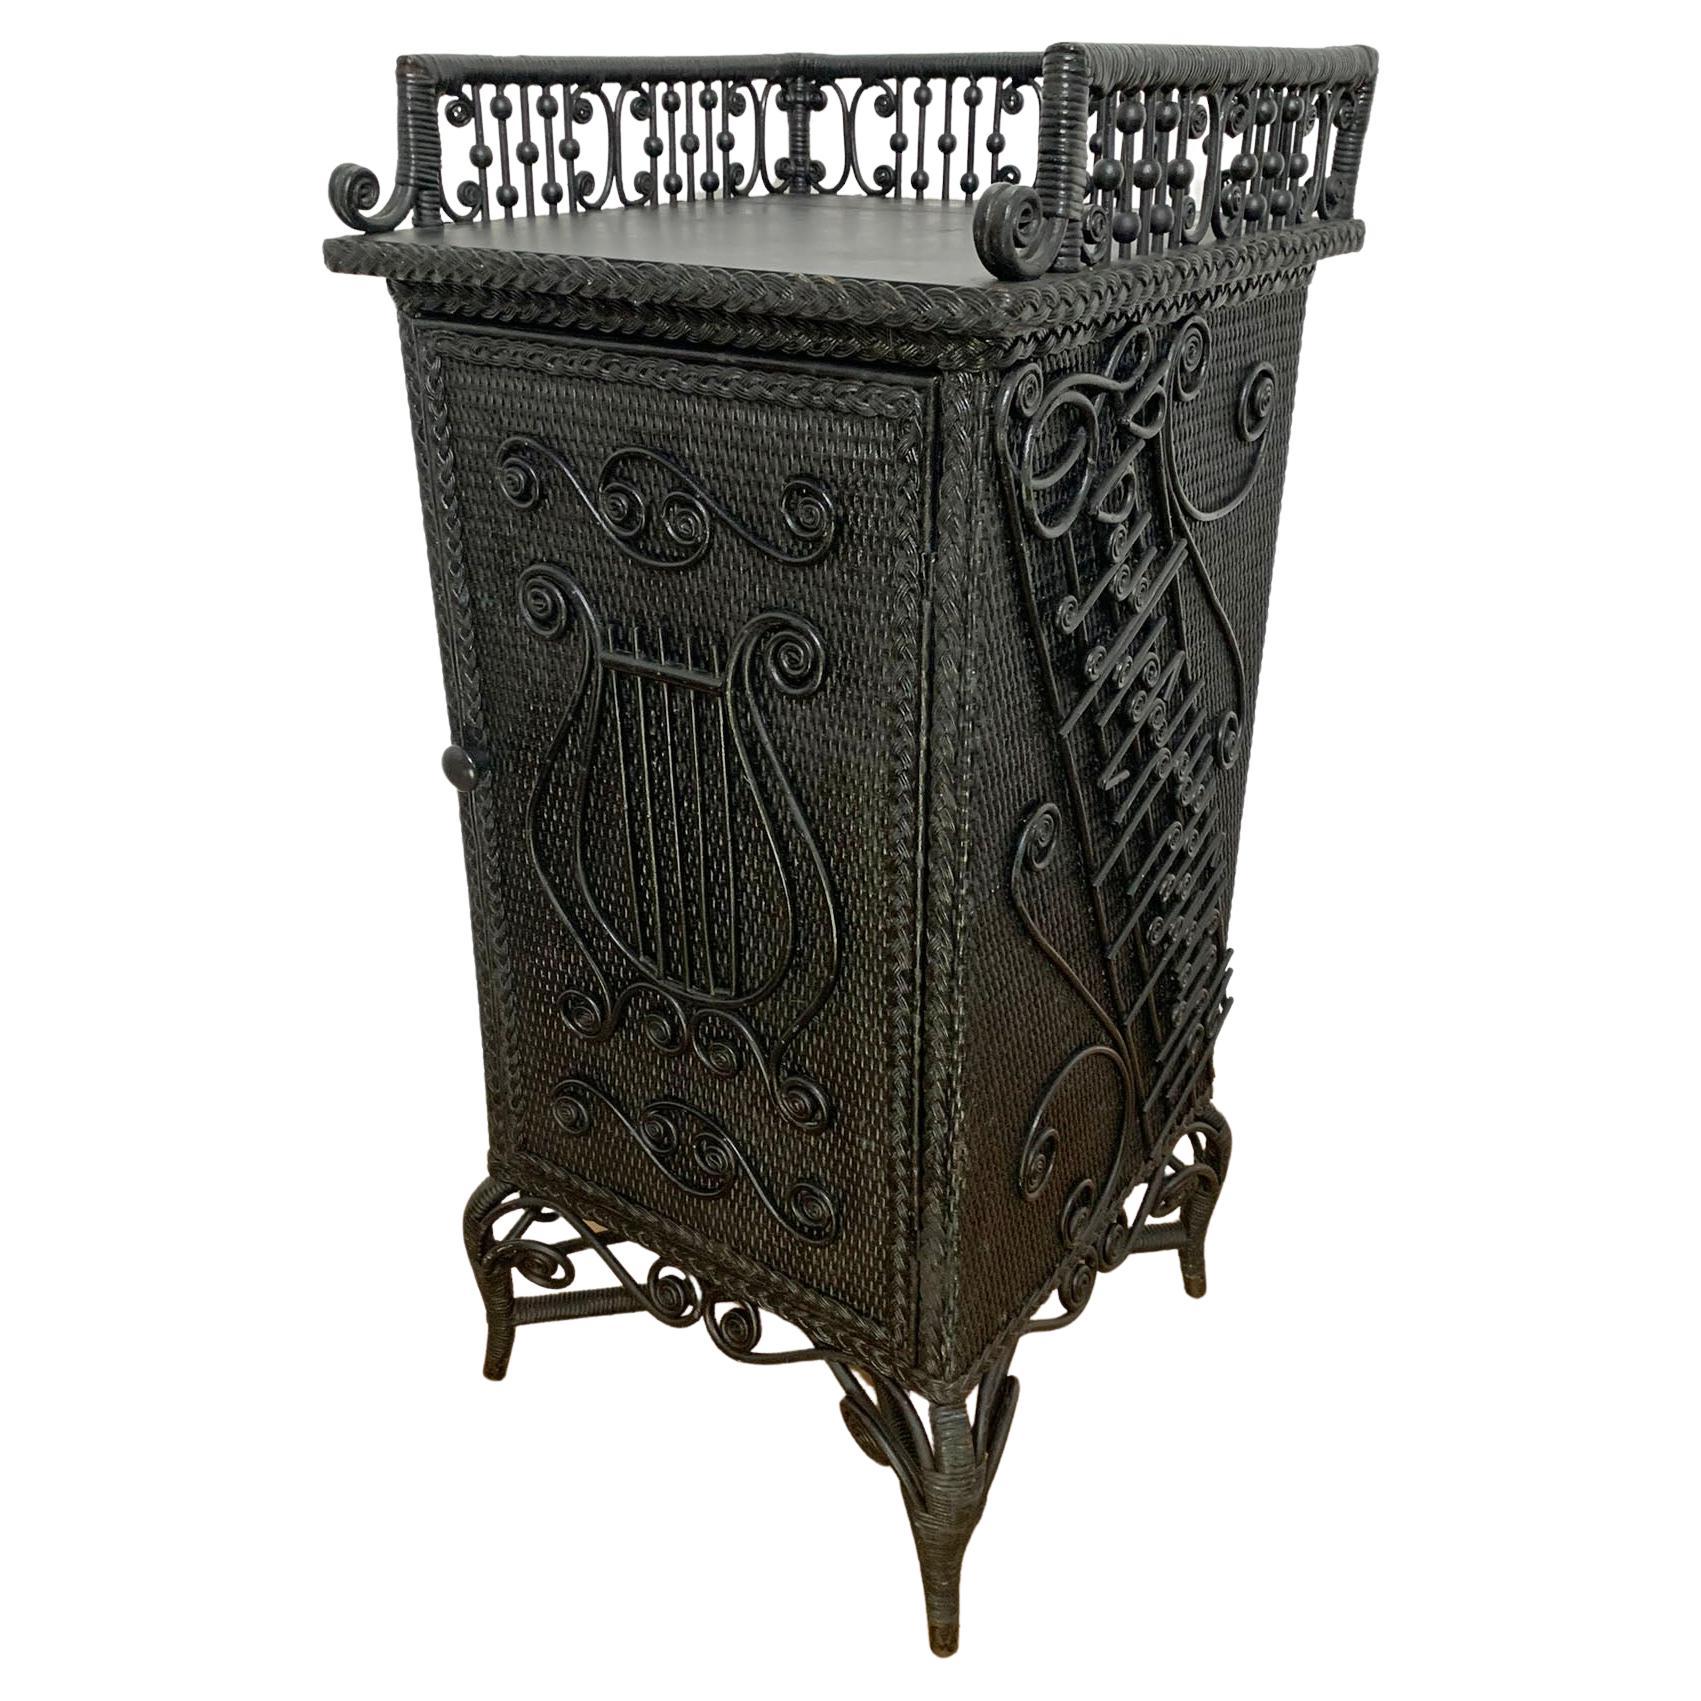 Circa 1890s Aesthetic Movement Music Cabinet by Heywood Brothers and Wakefield